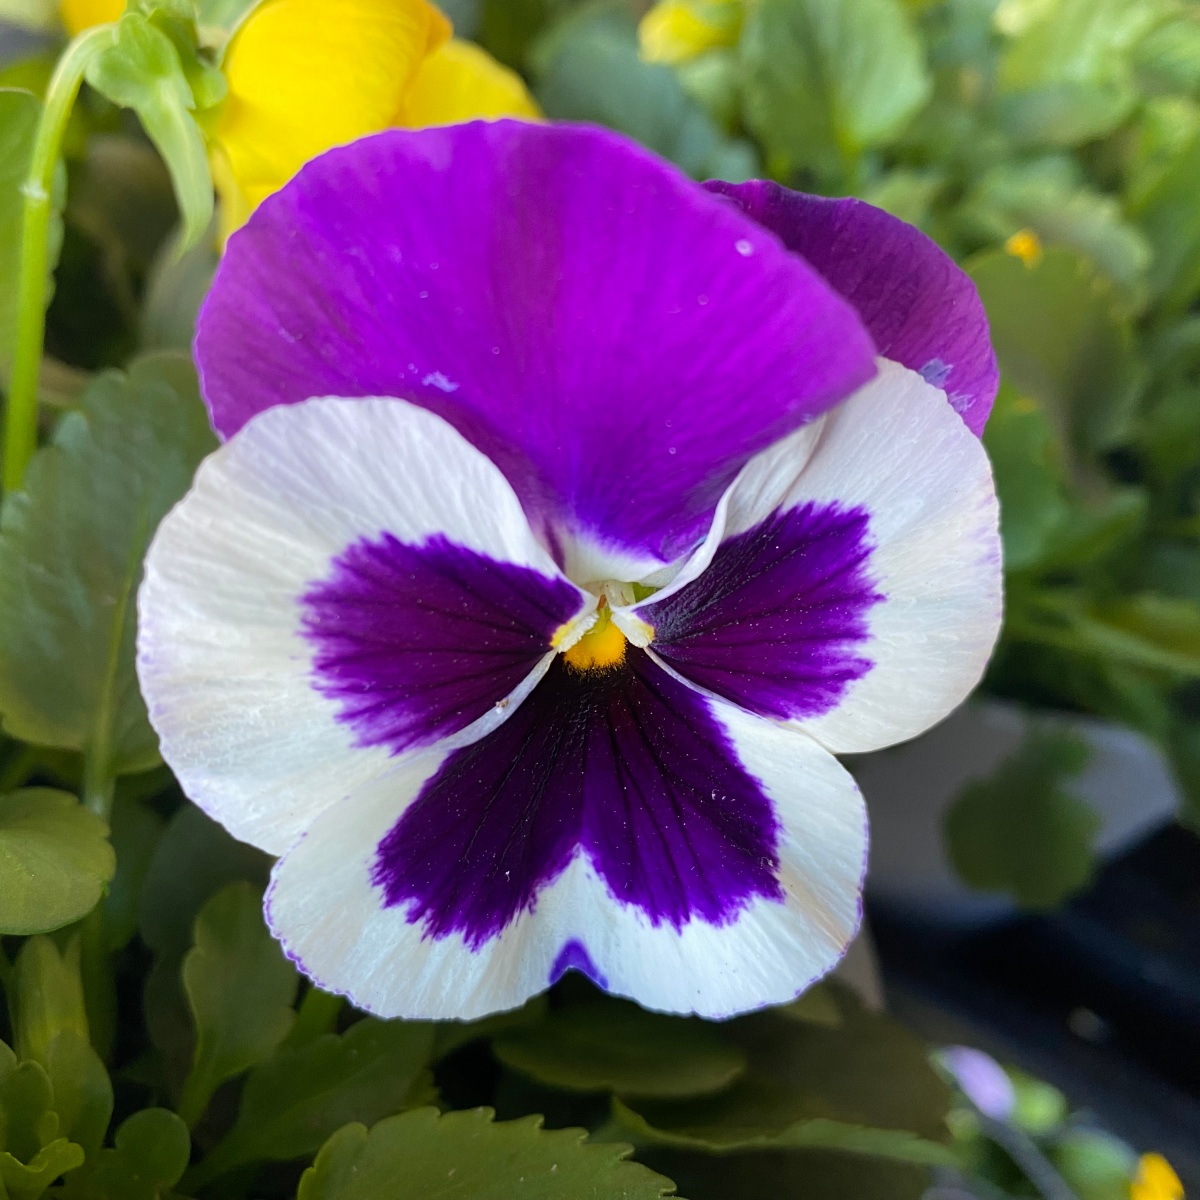 Spring – Pansies, a flower with a face!